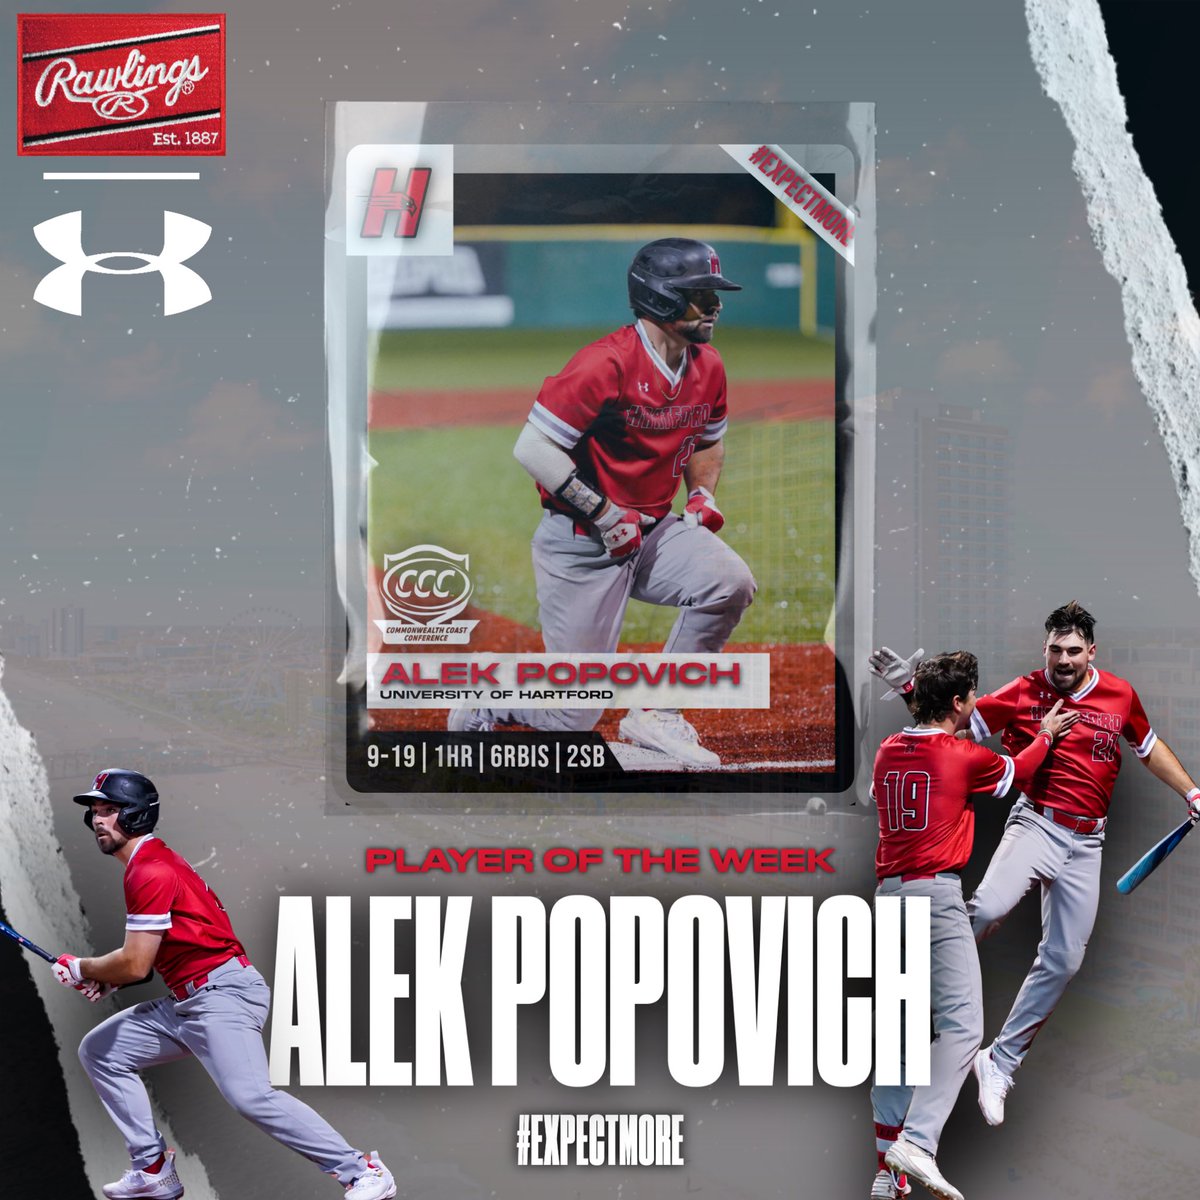 CONGRATS to alumnus & former Captain @AlekPopovich for an AWESOME START to his @HartfordBASE career!! Keep grinding, Captain!